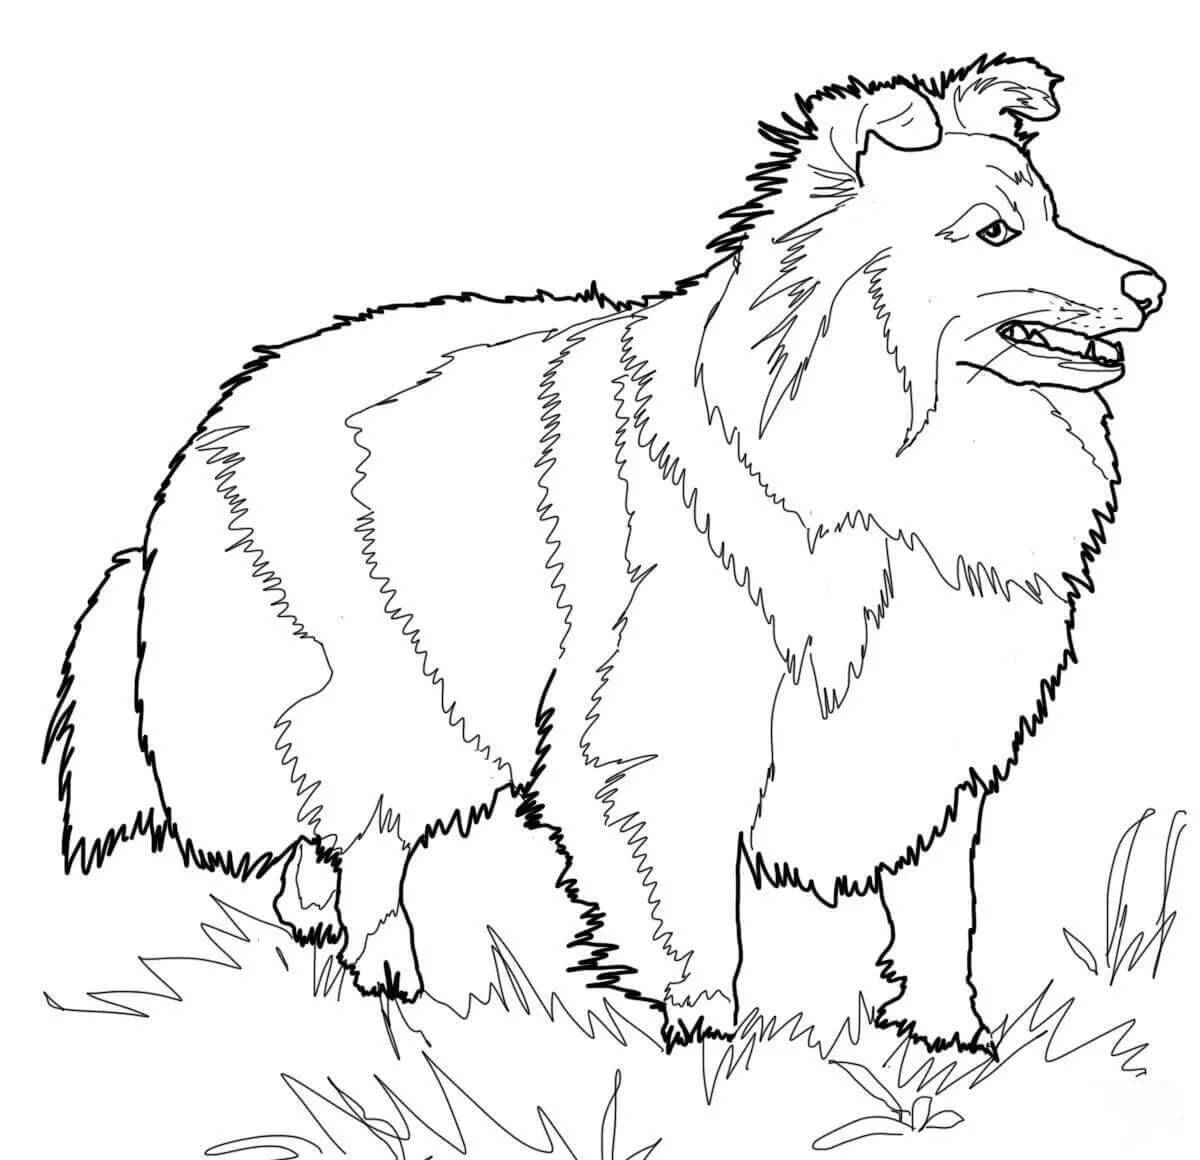 Dazzling collie coloring page